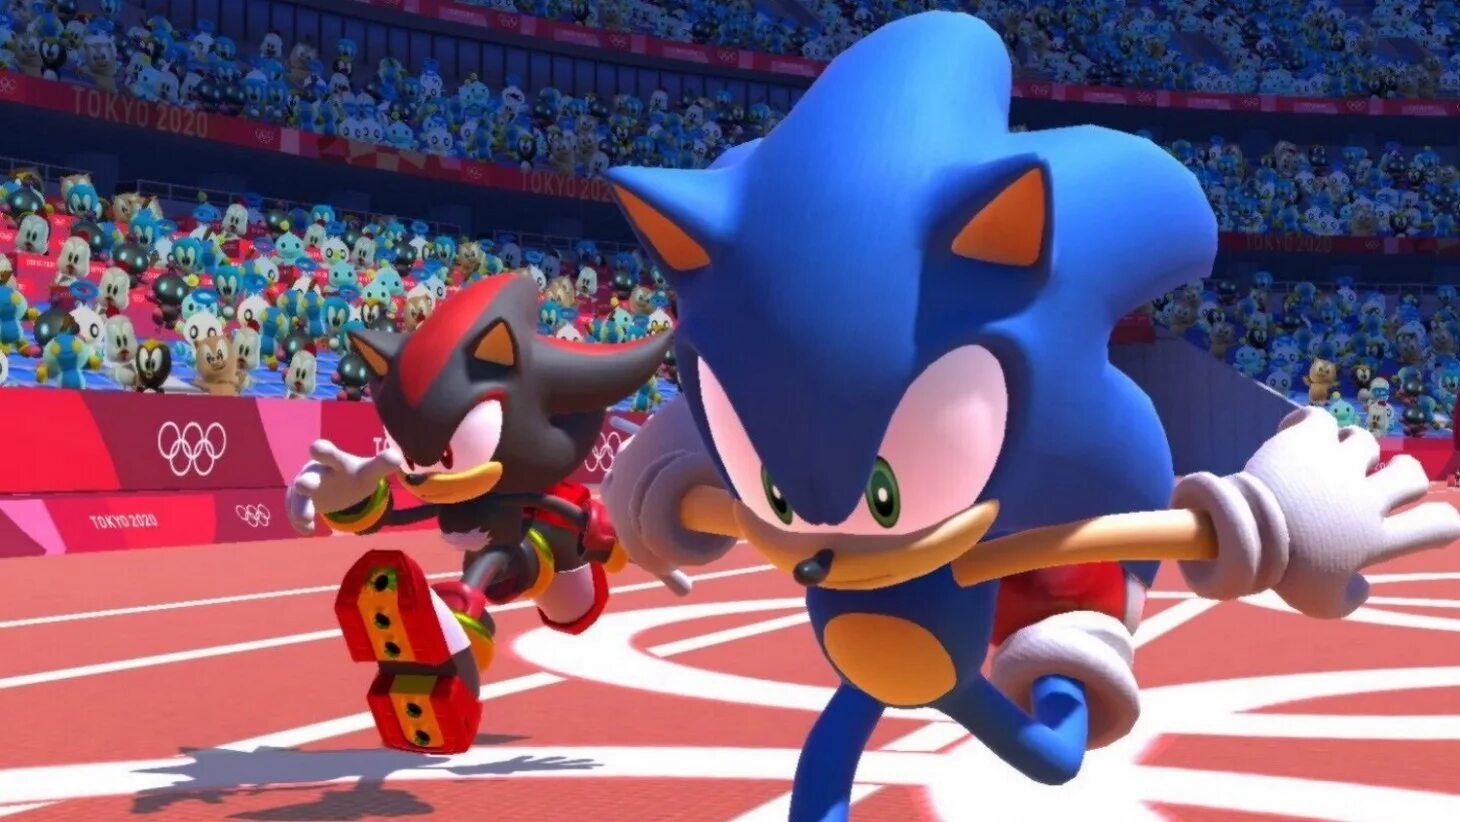 Mario and Sonic at the Olympic games Tokyo 2020. Sonic игры 2020. Sonic and Mario at the Olympic games 2020. Sonic Mario 2020.